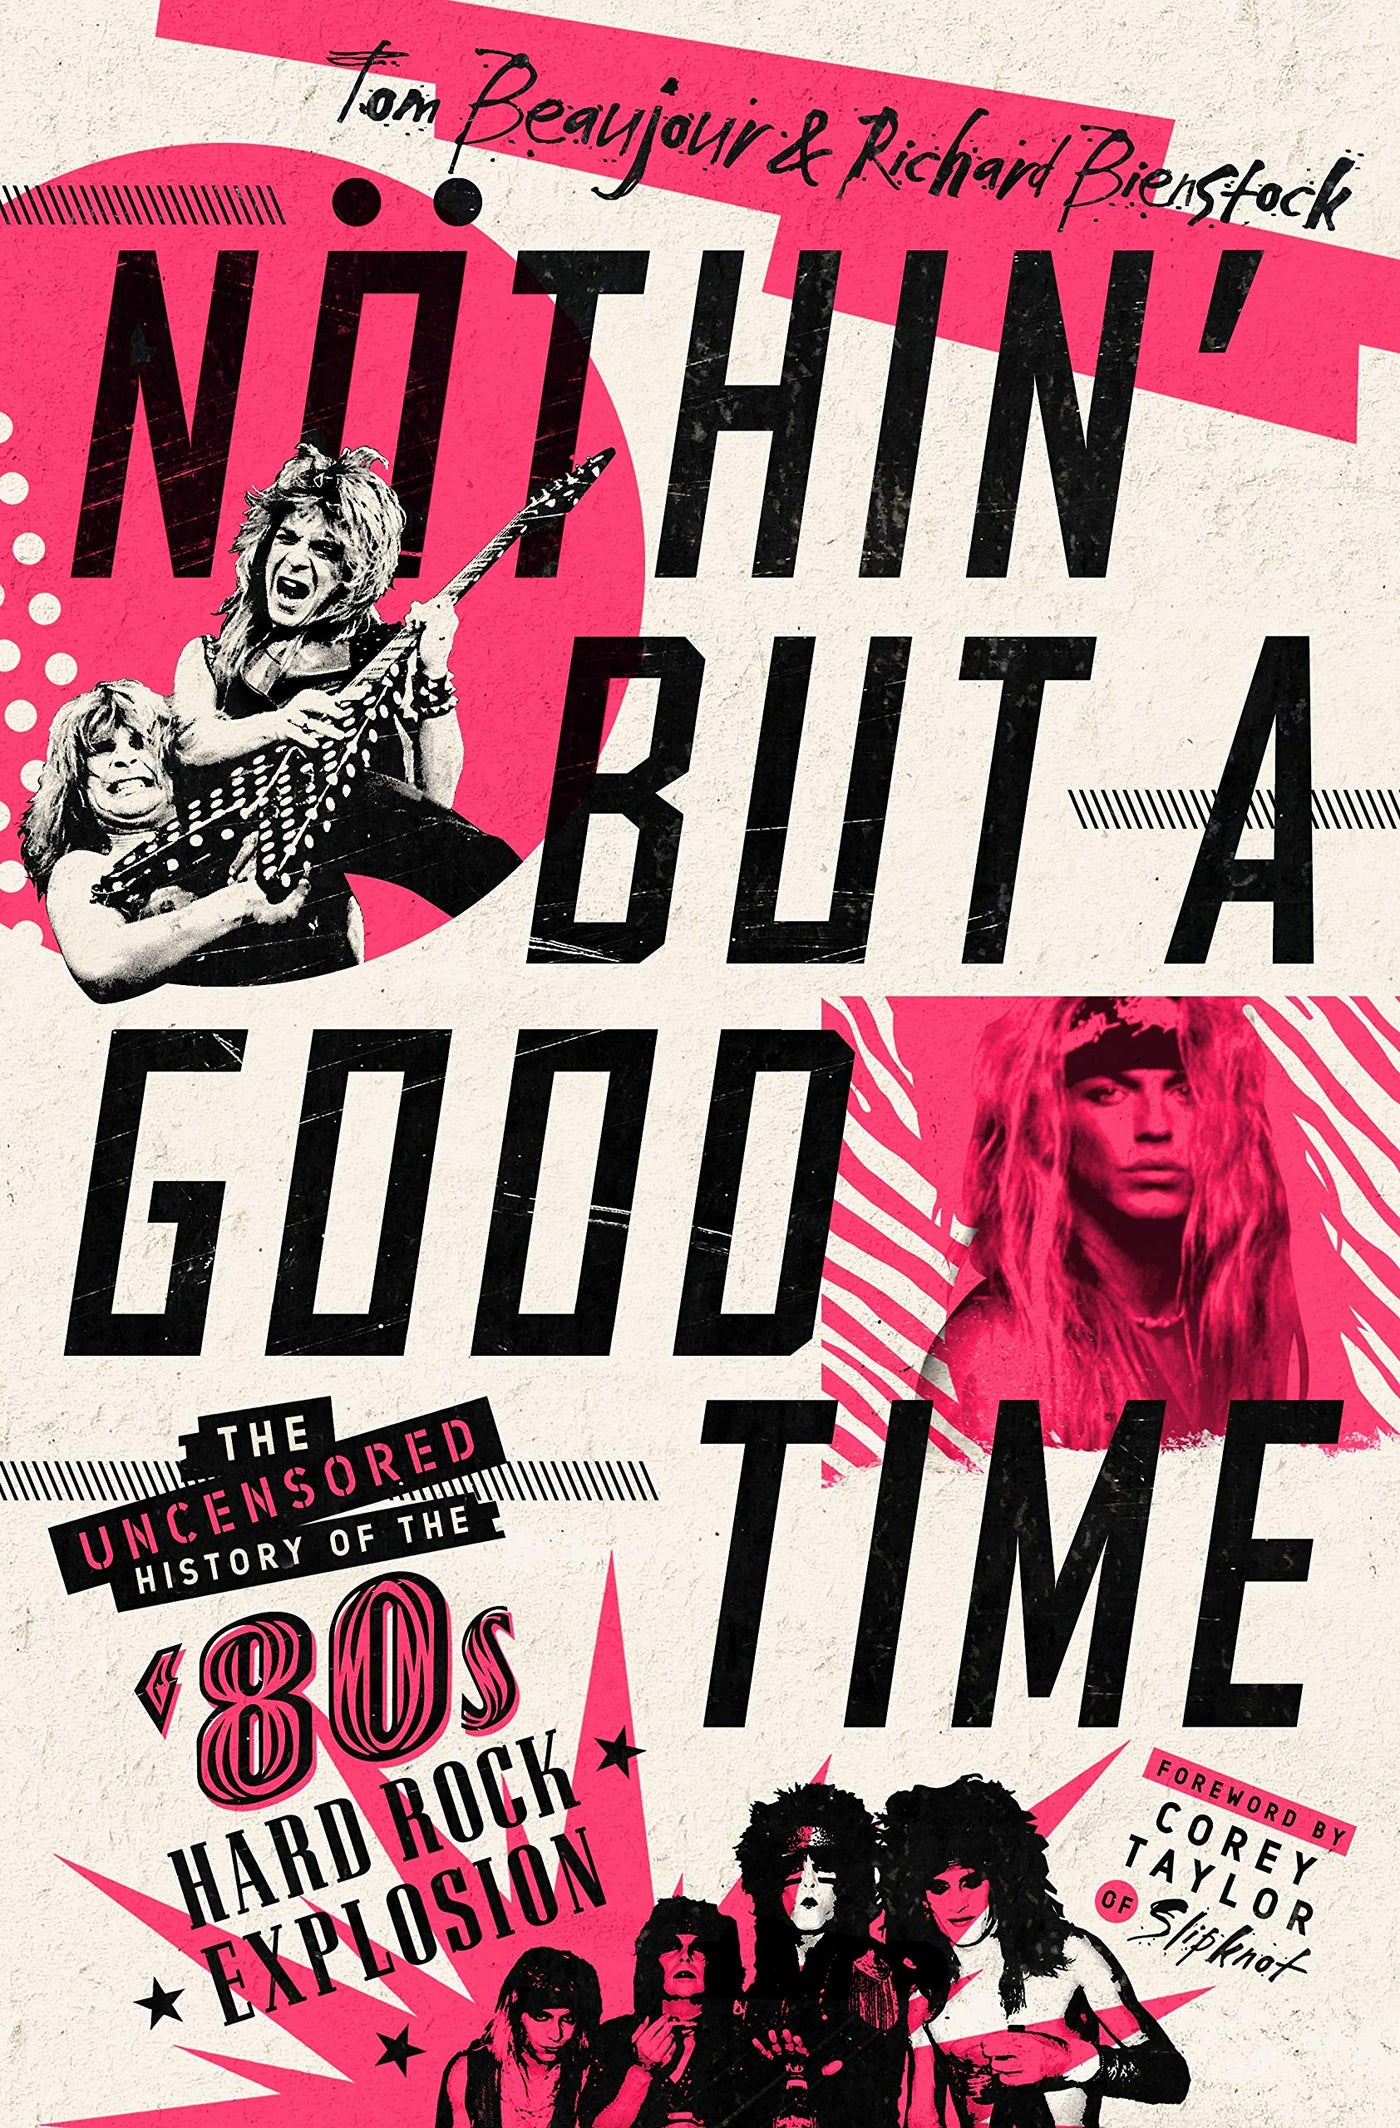 Nothin’ But a Good Time: The Uncensored History of the ‘80s Hard Rock Explosion by Tom Beaujour and Richard Bienstock